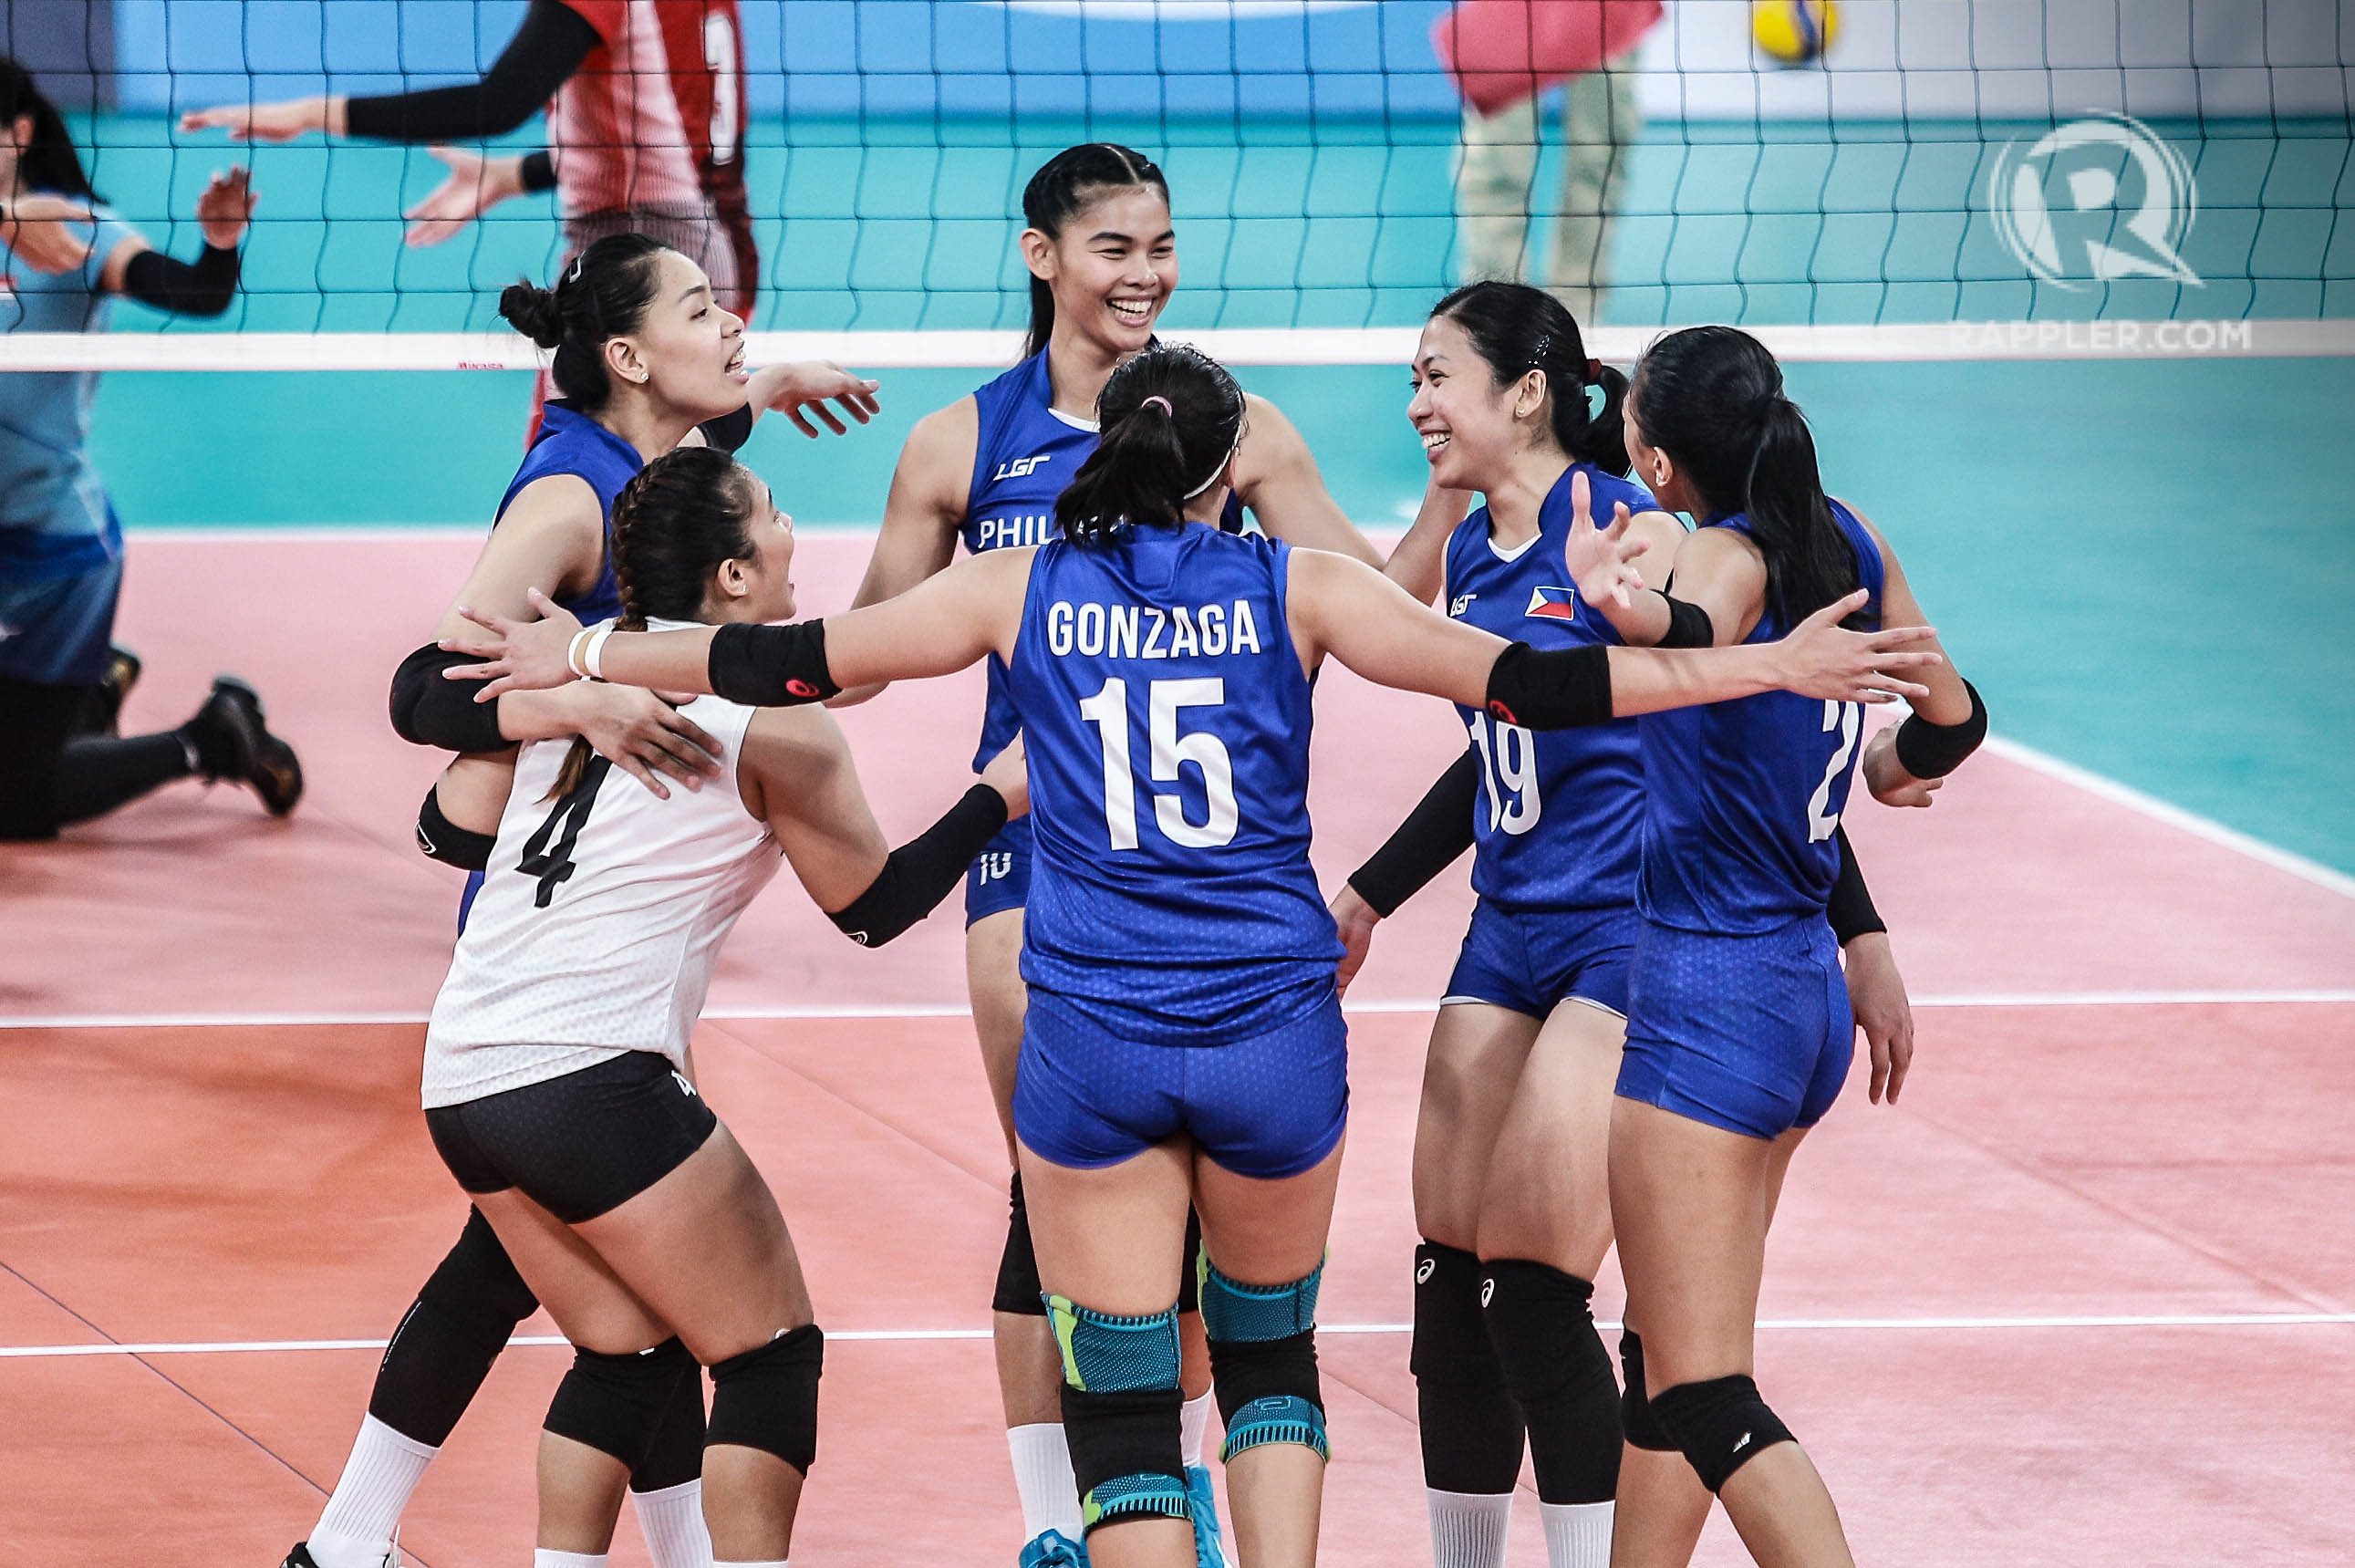 Former PH volleyball federation demands $80,000 refund from FIVB